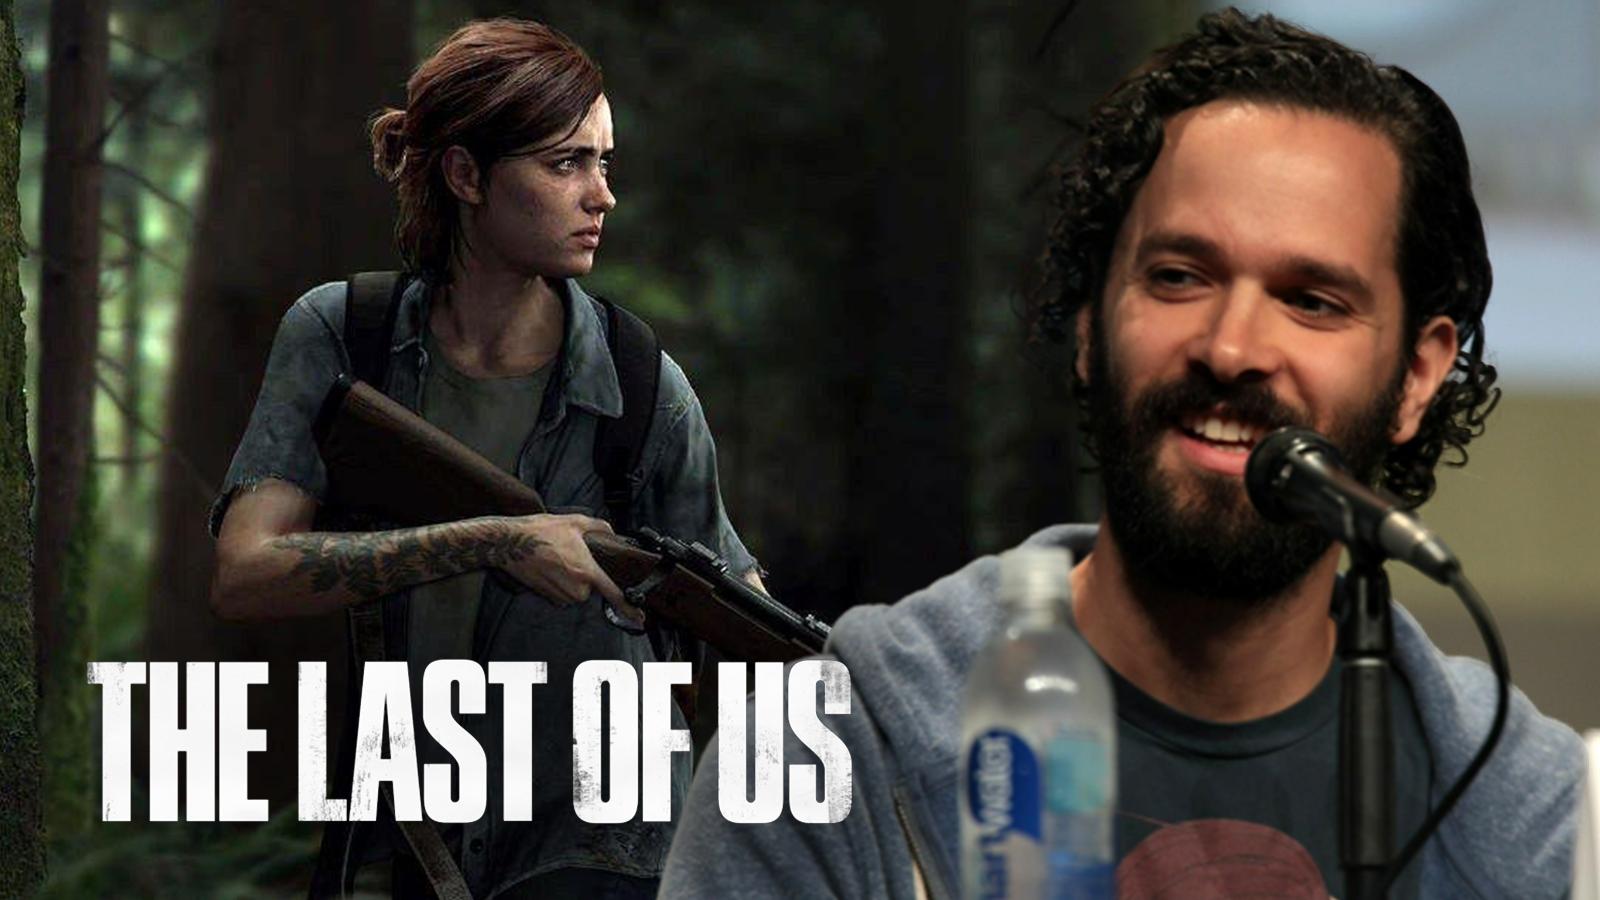 Last of Us' director Neil Druckmann promoted to Vice Pres of Naughty Dog